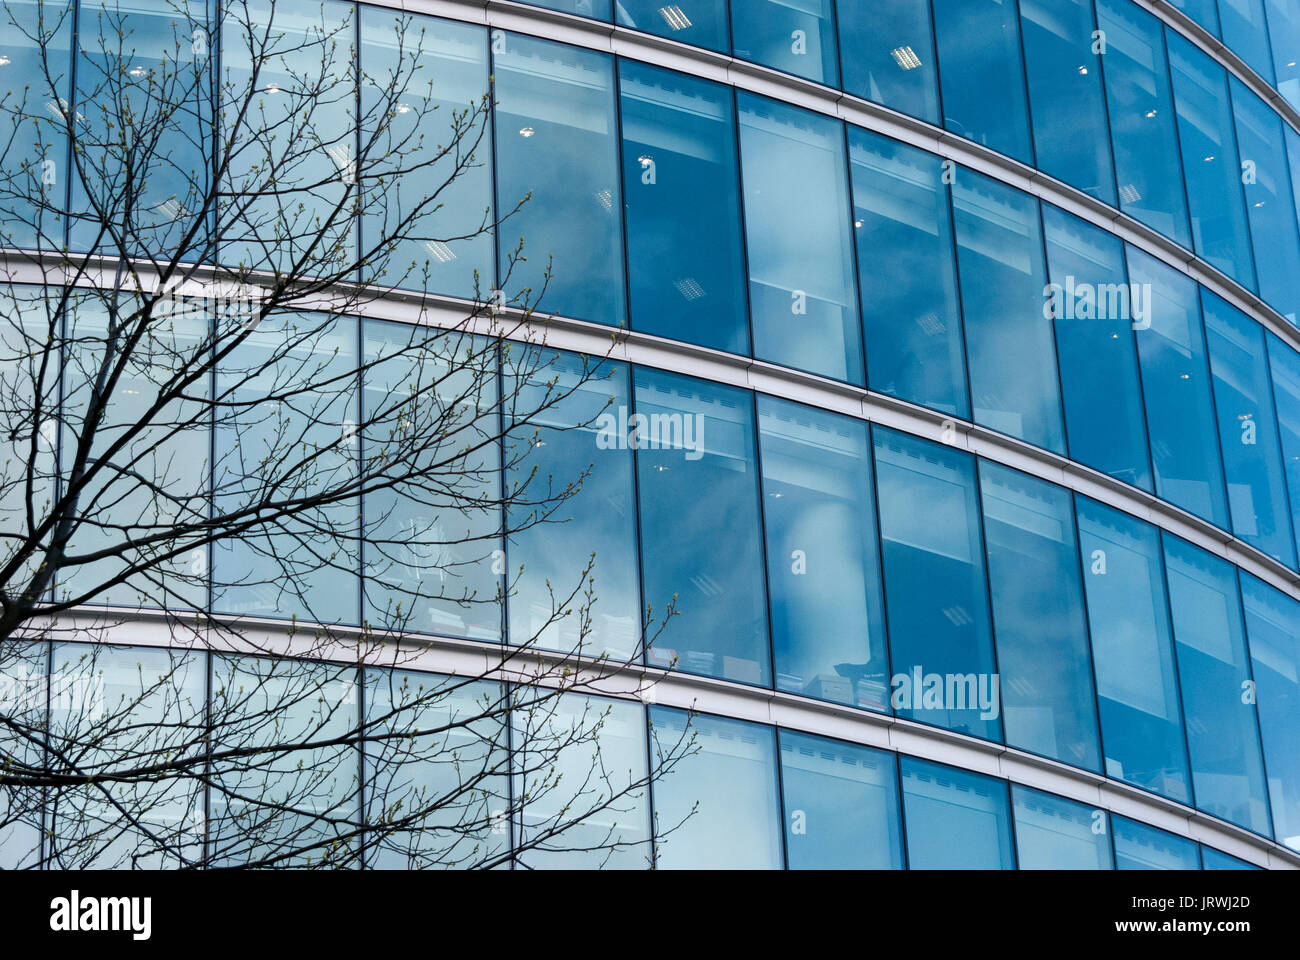 Glass Windows, Offices, Workplace, Blue Tinted Windows, Architecture Stock Photo